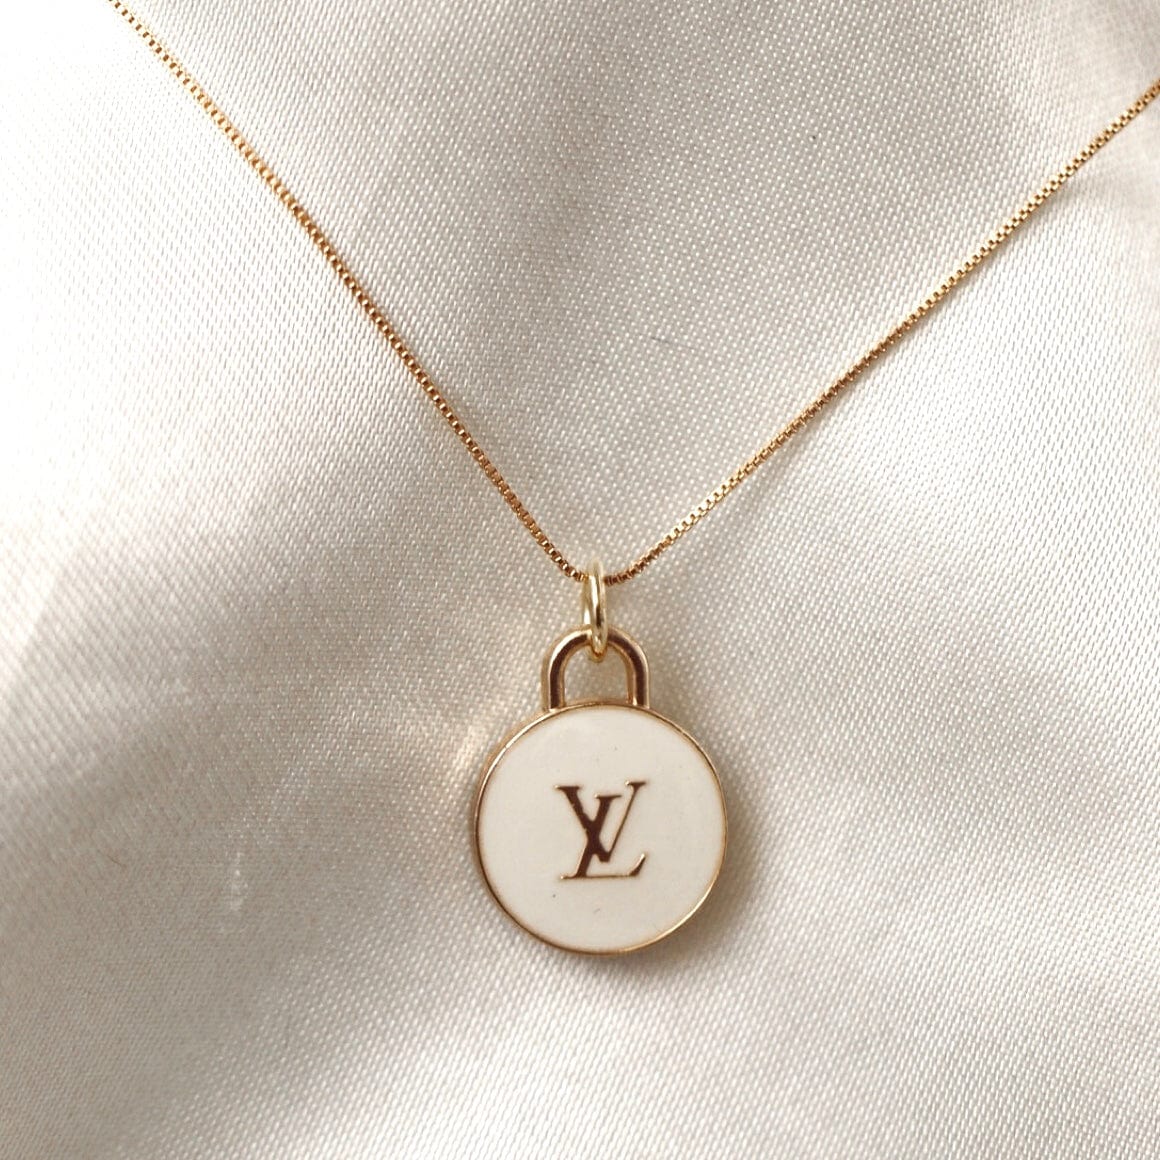 Products by Louis Vuitton: Monogram Charms Necklace